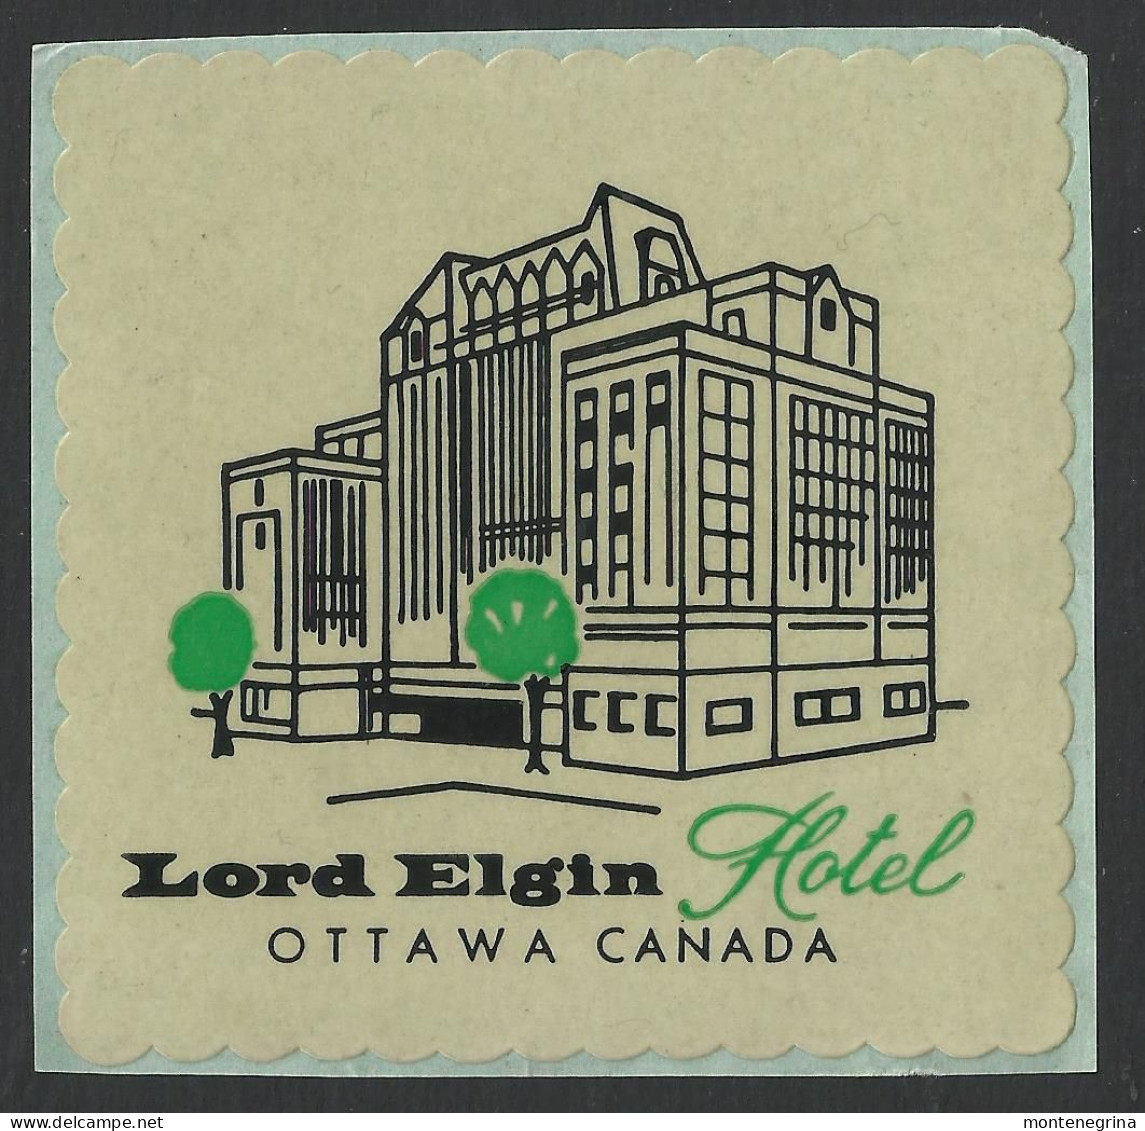 CANADA - OTTAWA - Hotel LORD ELGIN Luggage Label - 8 X 8 Cm (see Sales Conditions) - Hotel Labels